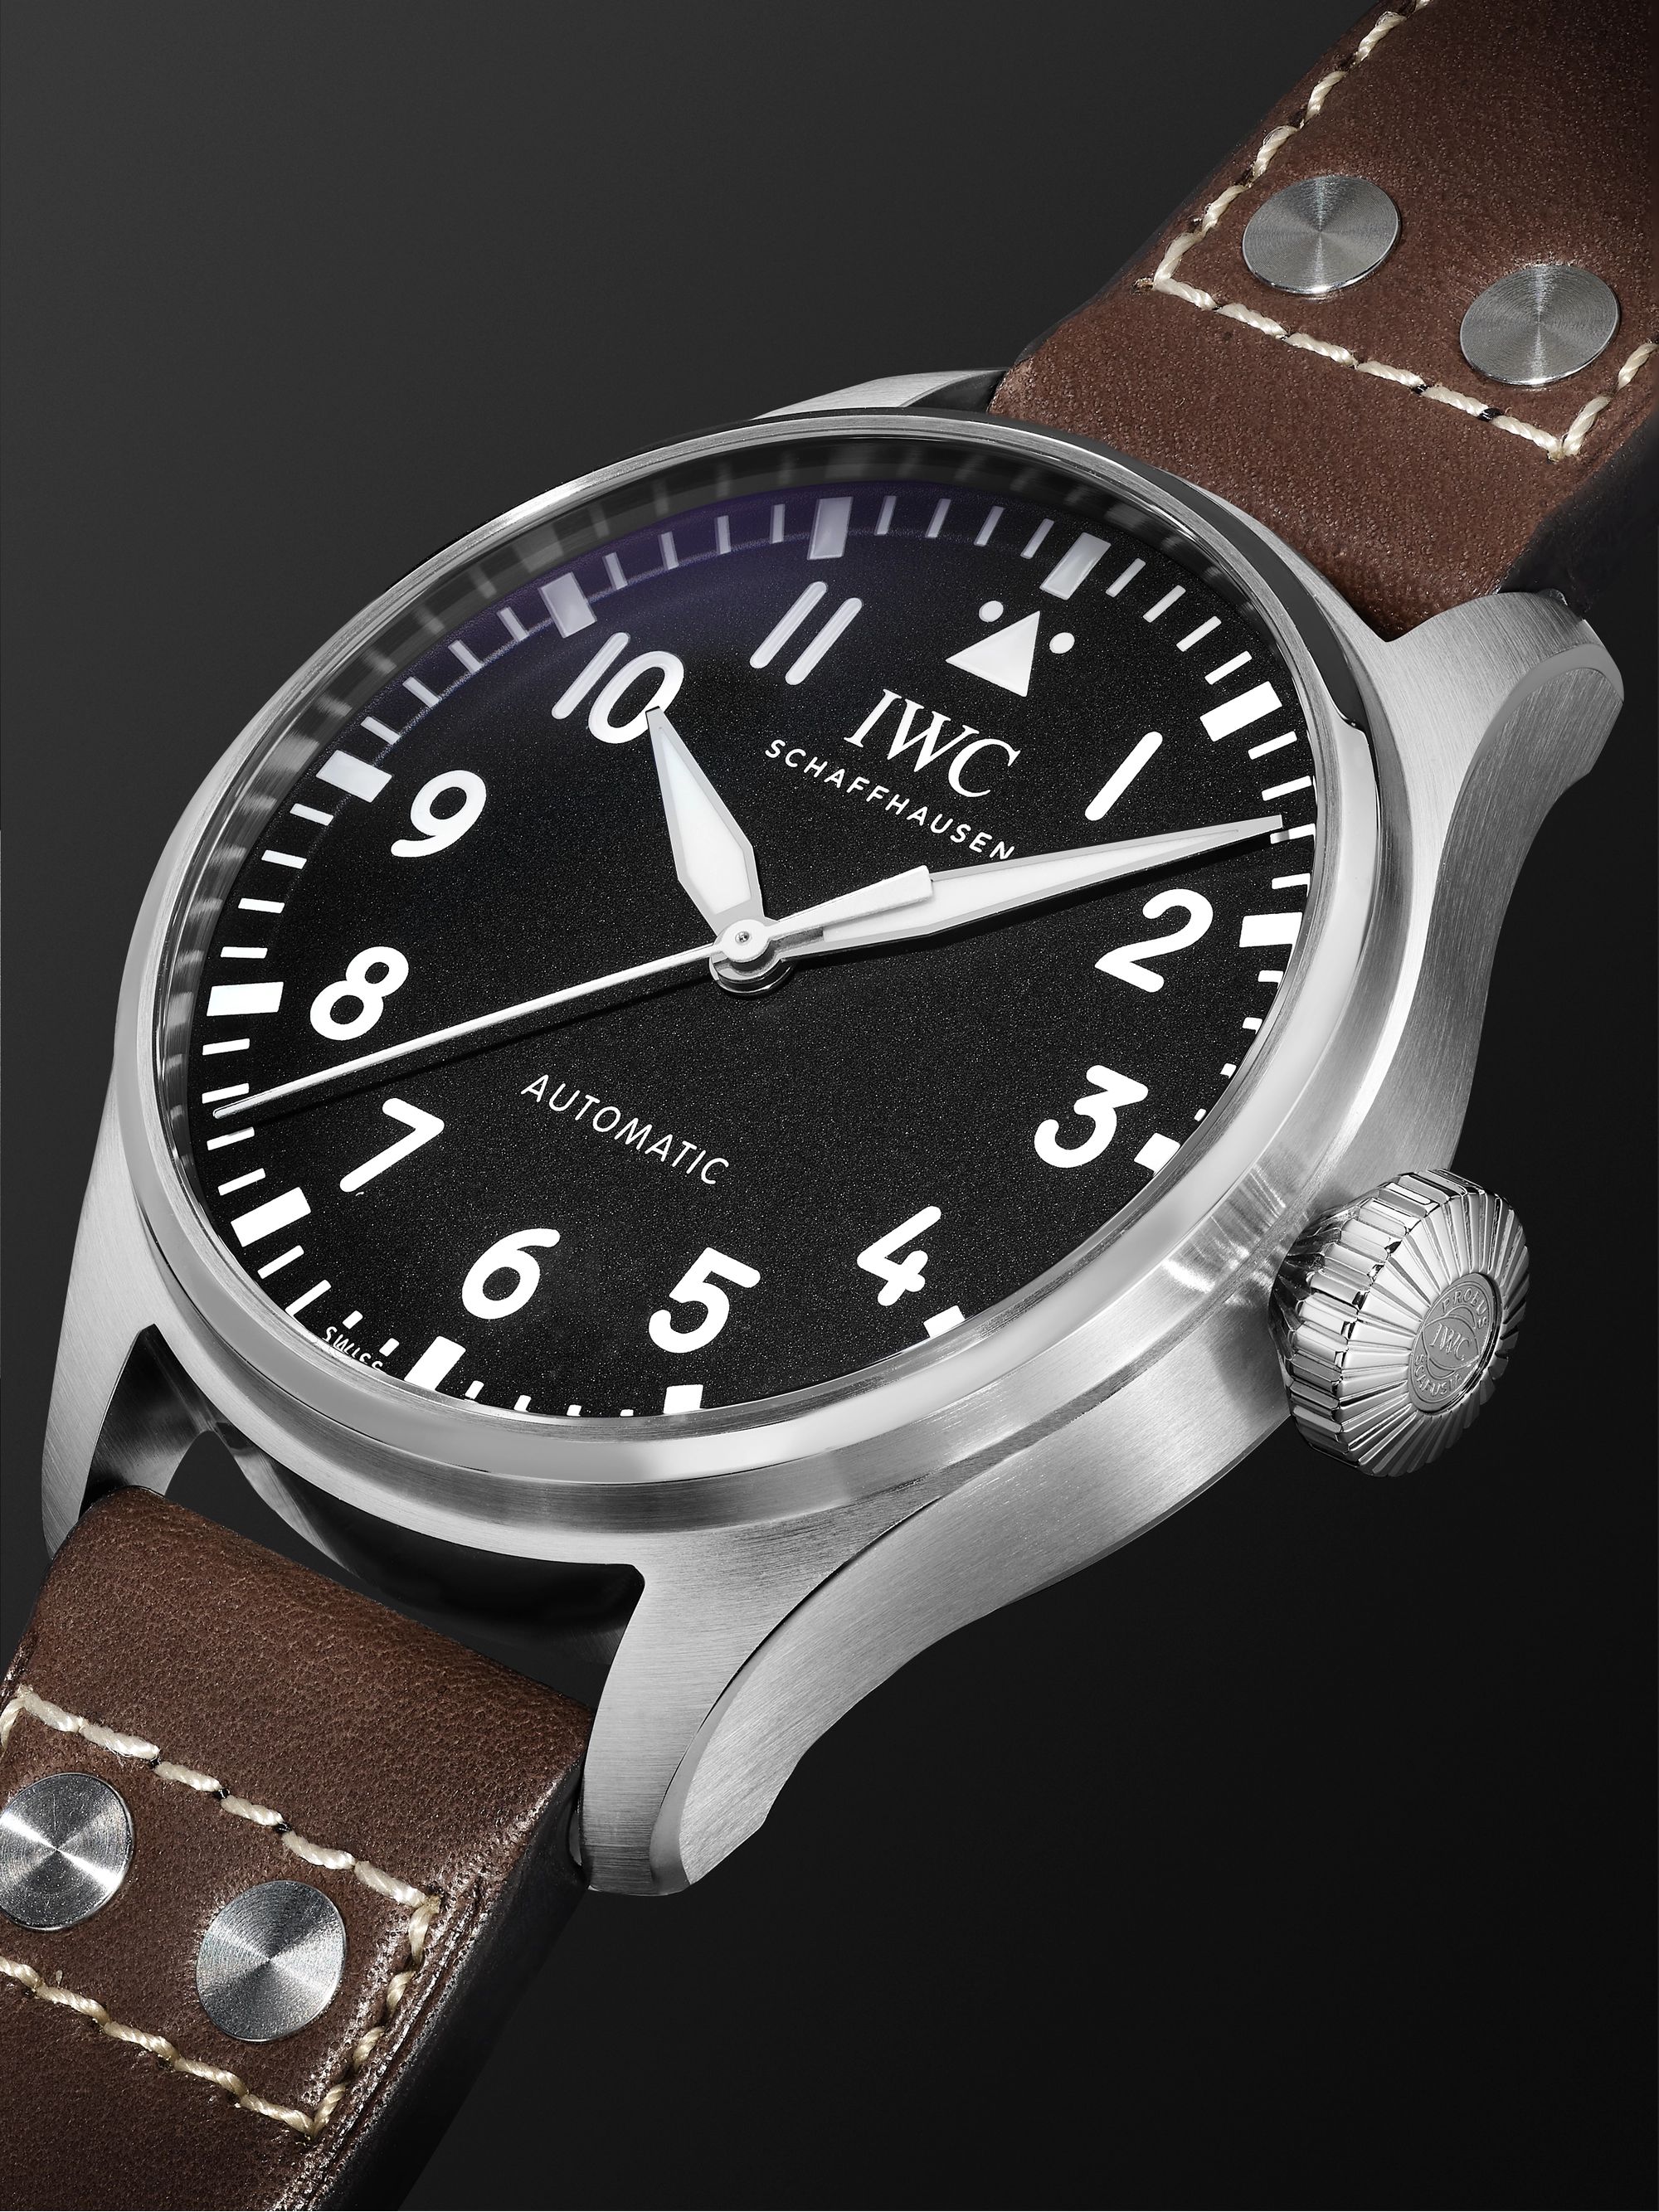 IWC SCHAFFHAUSEN Big Pilot's Automatic 43mm Stainless Steel and Leather Watch, Ref. No. IW329301